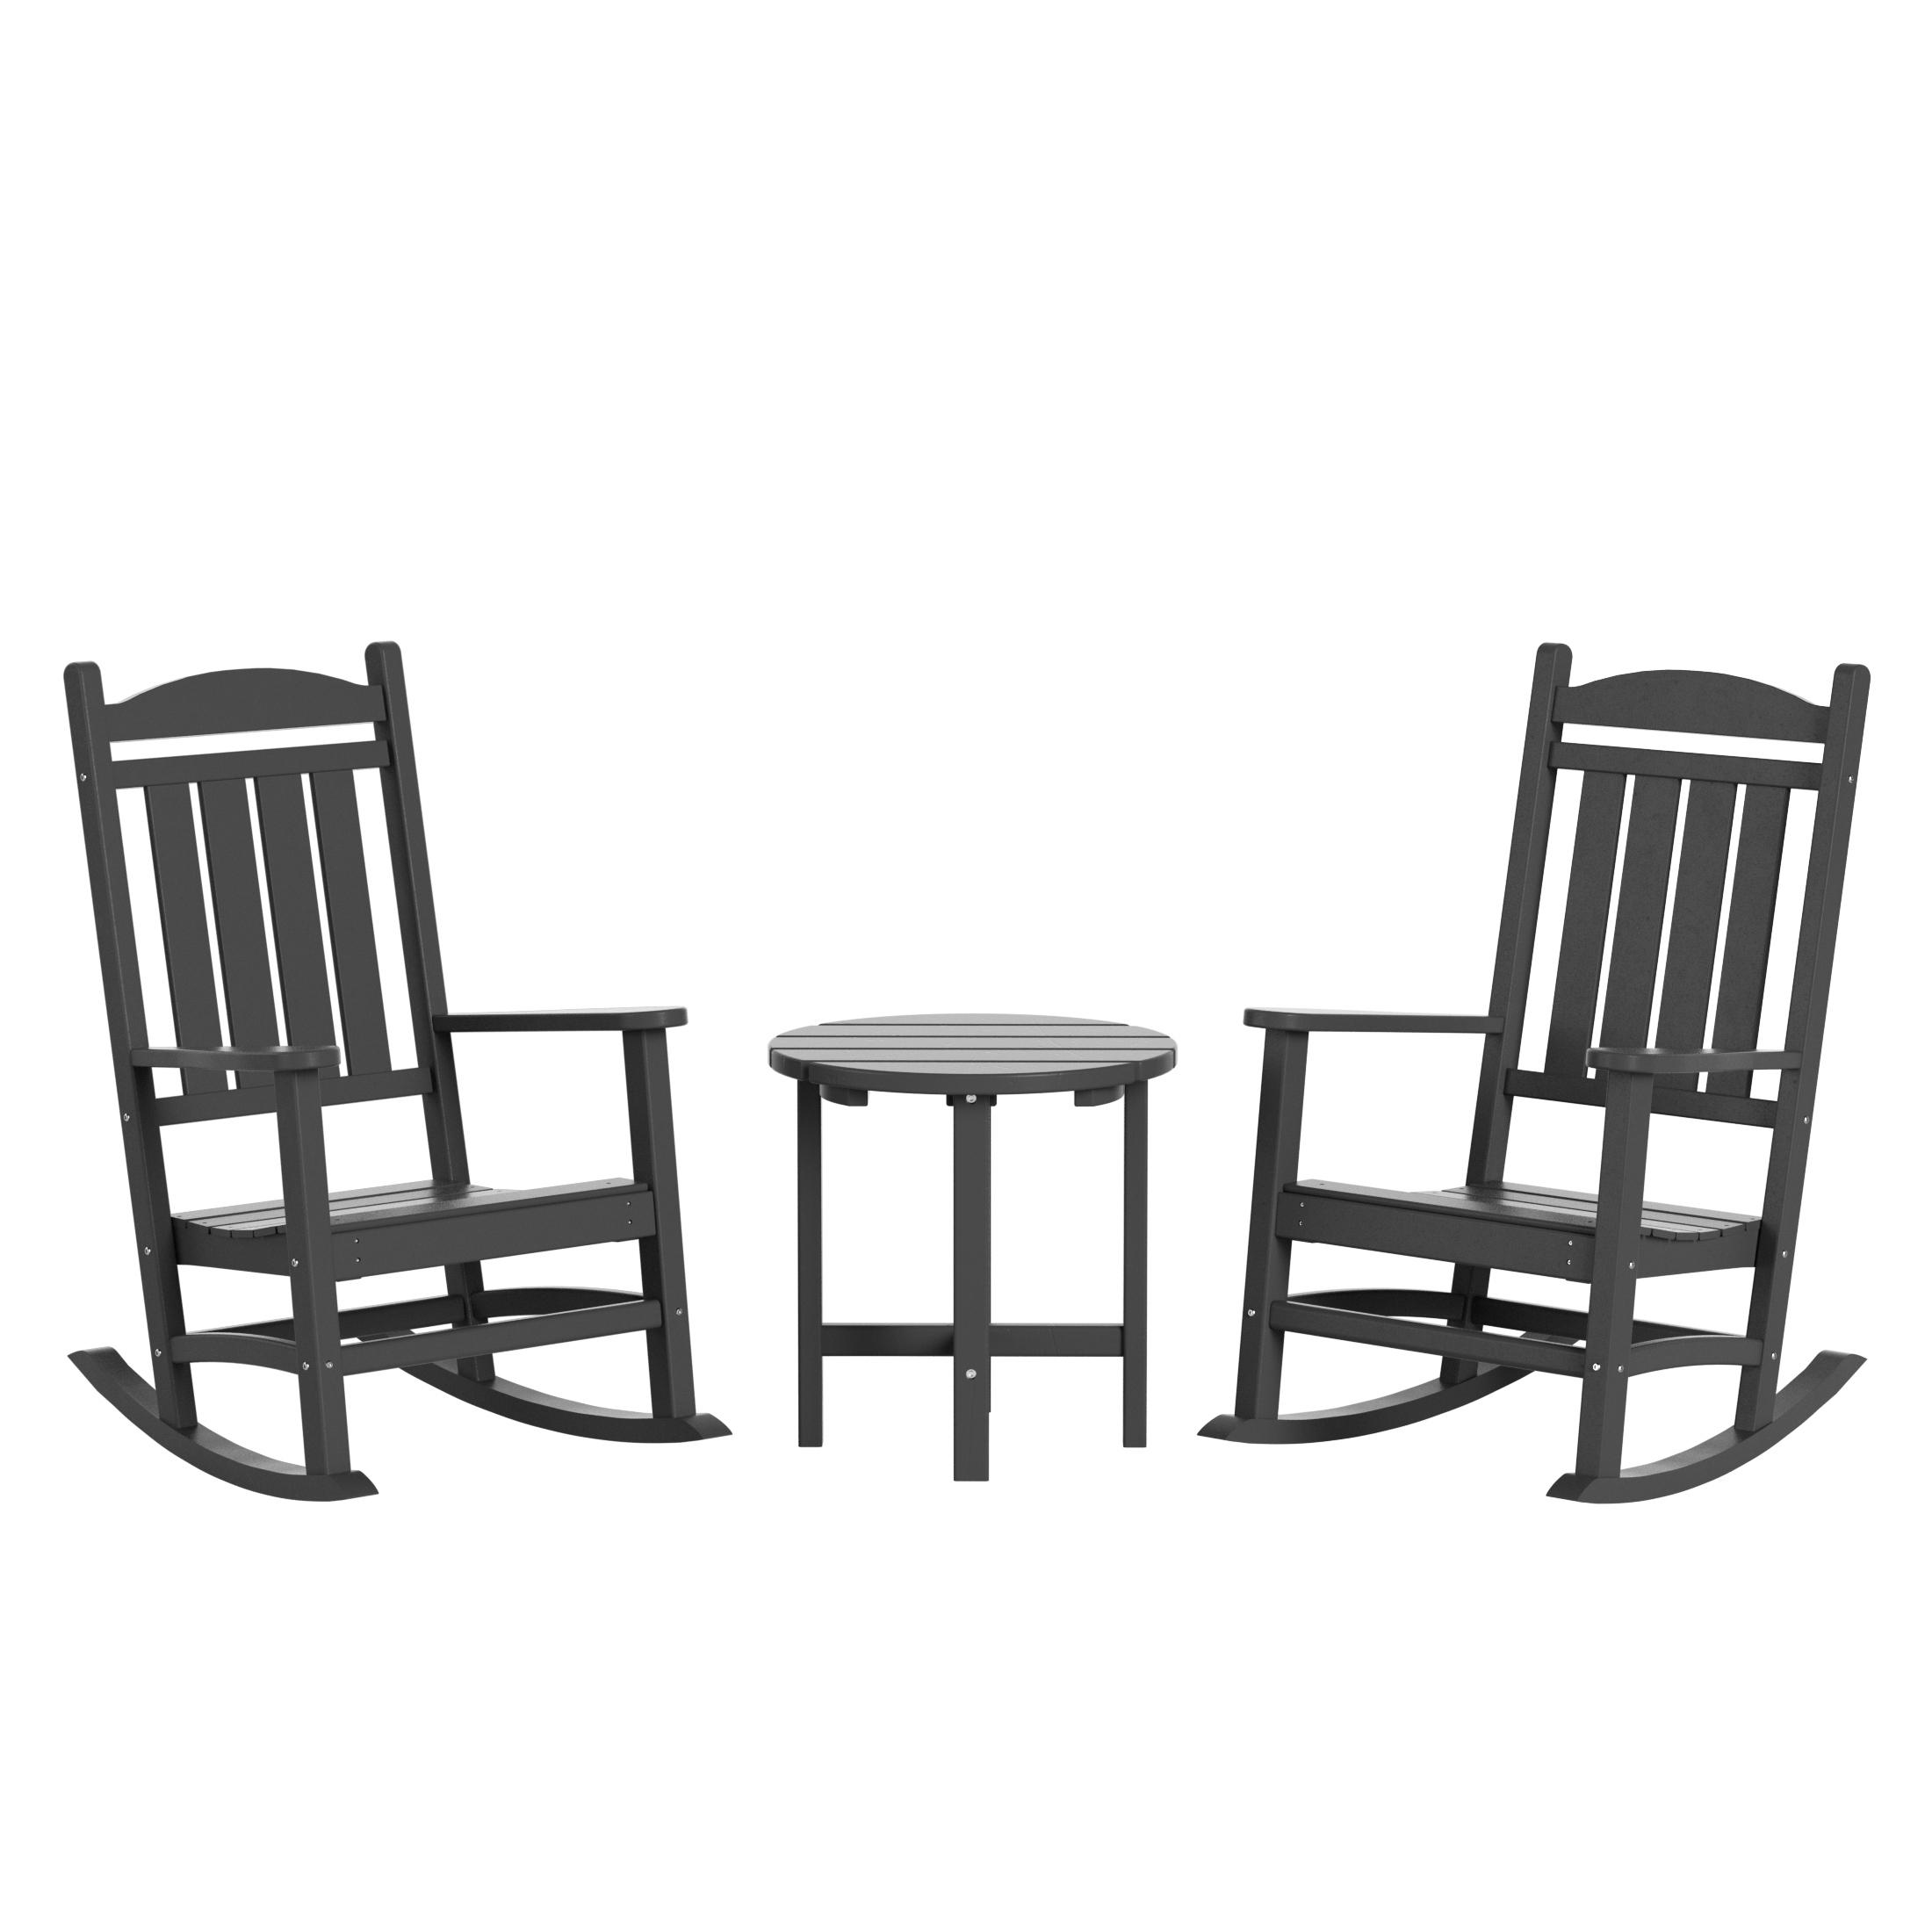 WestinTrends Malibu Classic 3 Piece Outdoor Rocking Chairs Set, All Weather Poly Lumber Adirondack Rocker Bistro Set Patio Deck Porch Chairs Set of 2 with Side Table, Gray - image 1 of 7